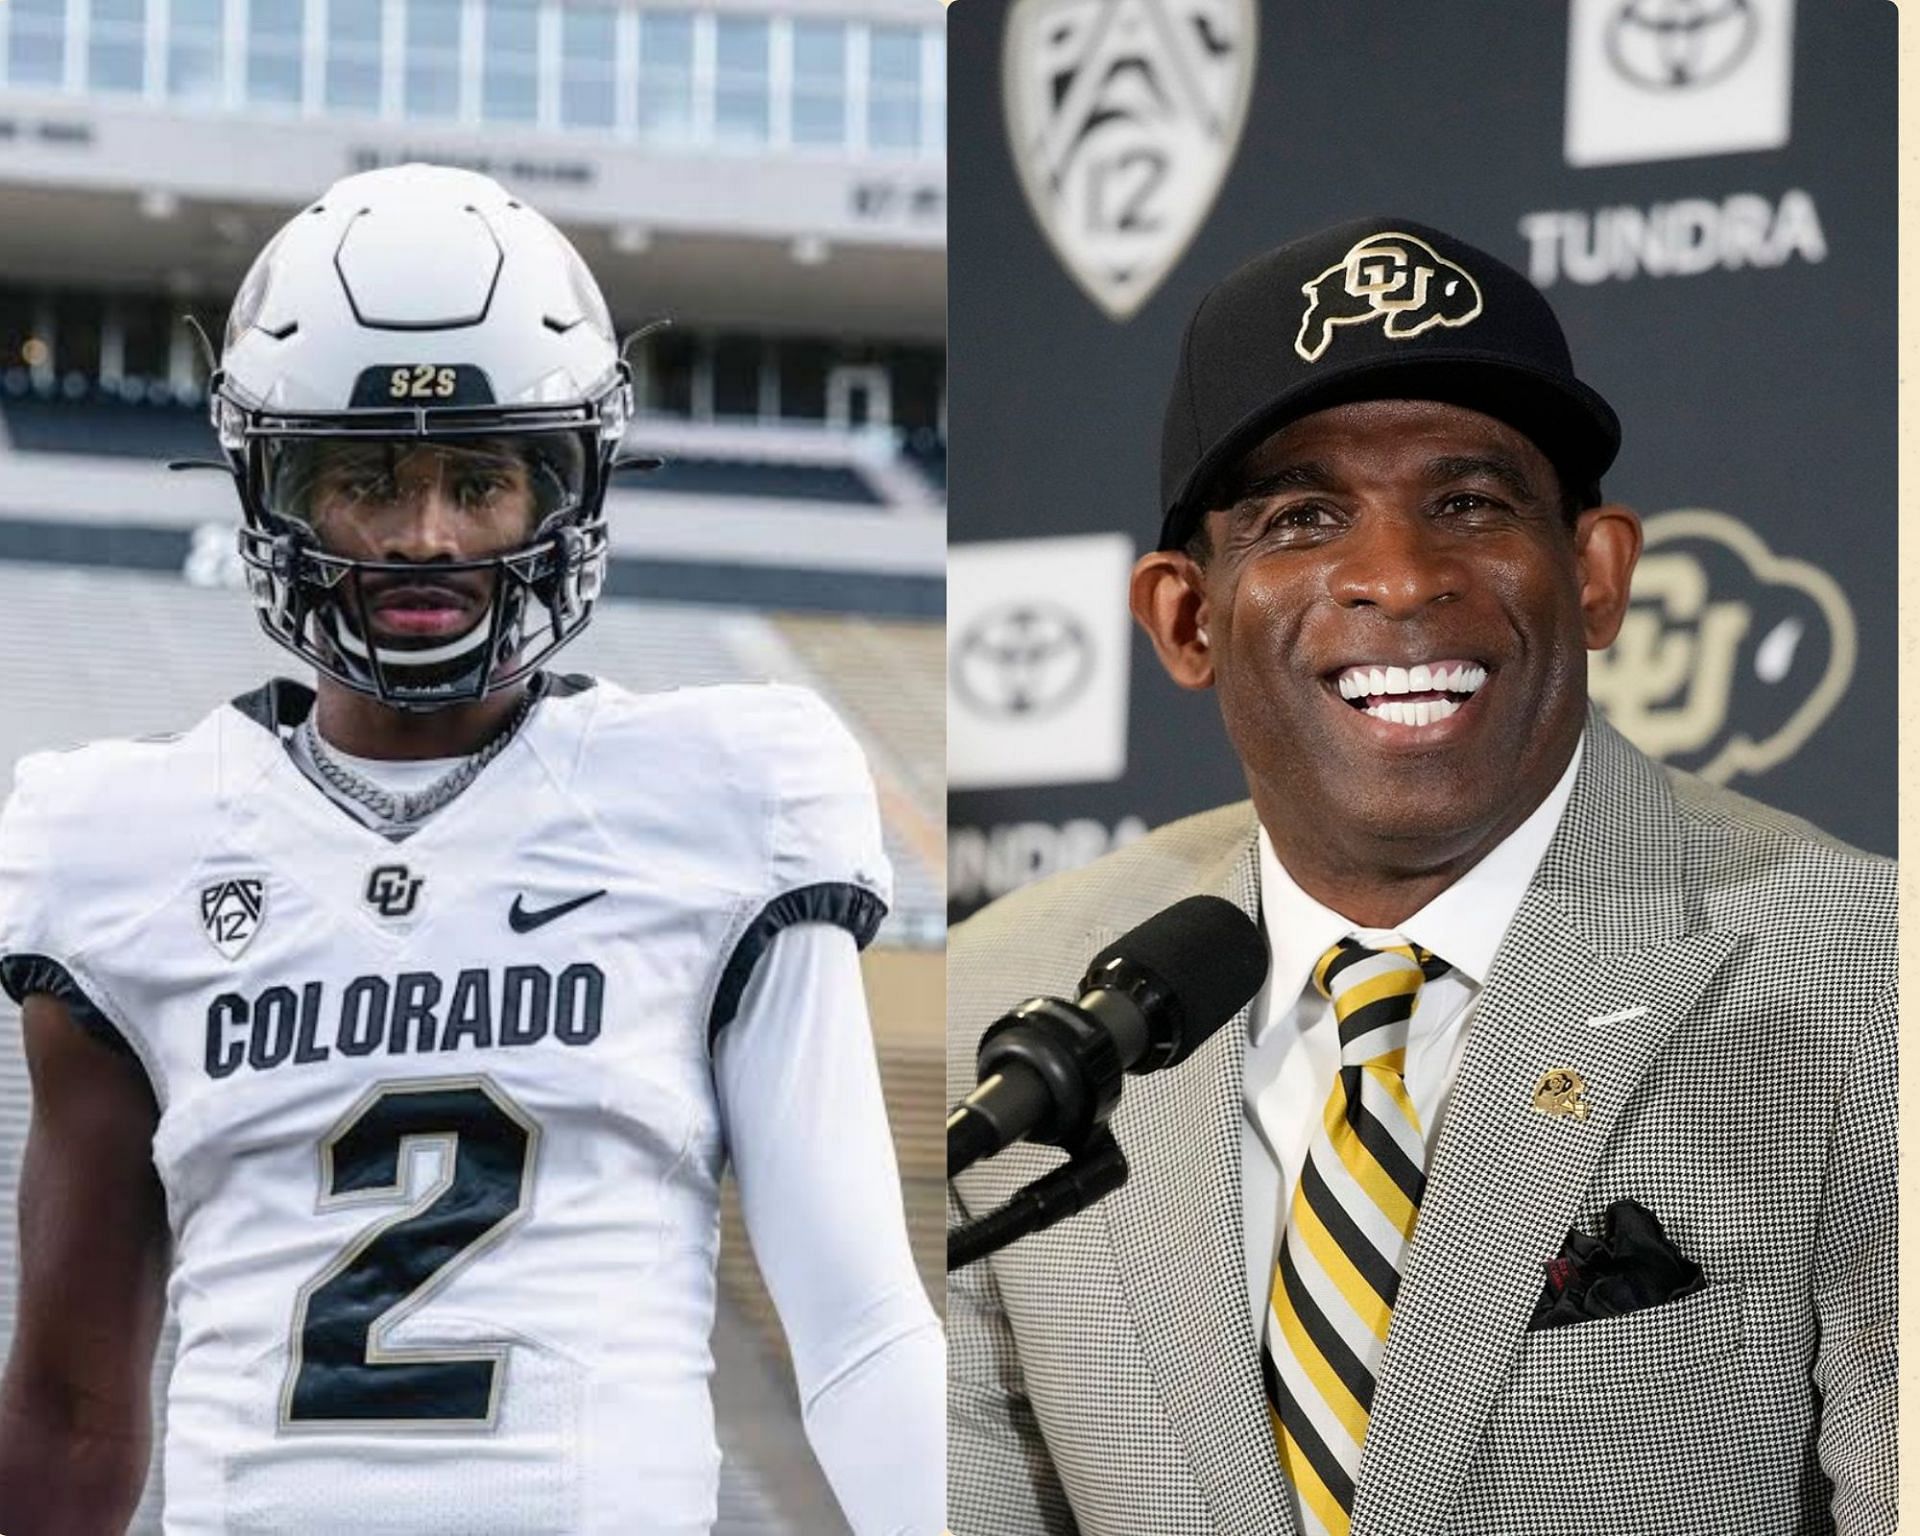 Deion Sanders was vindicated in the choice of his son as starting quarterback 